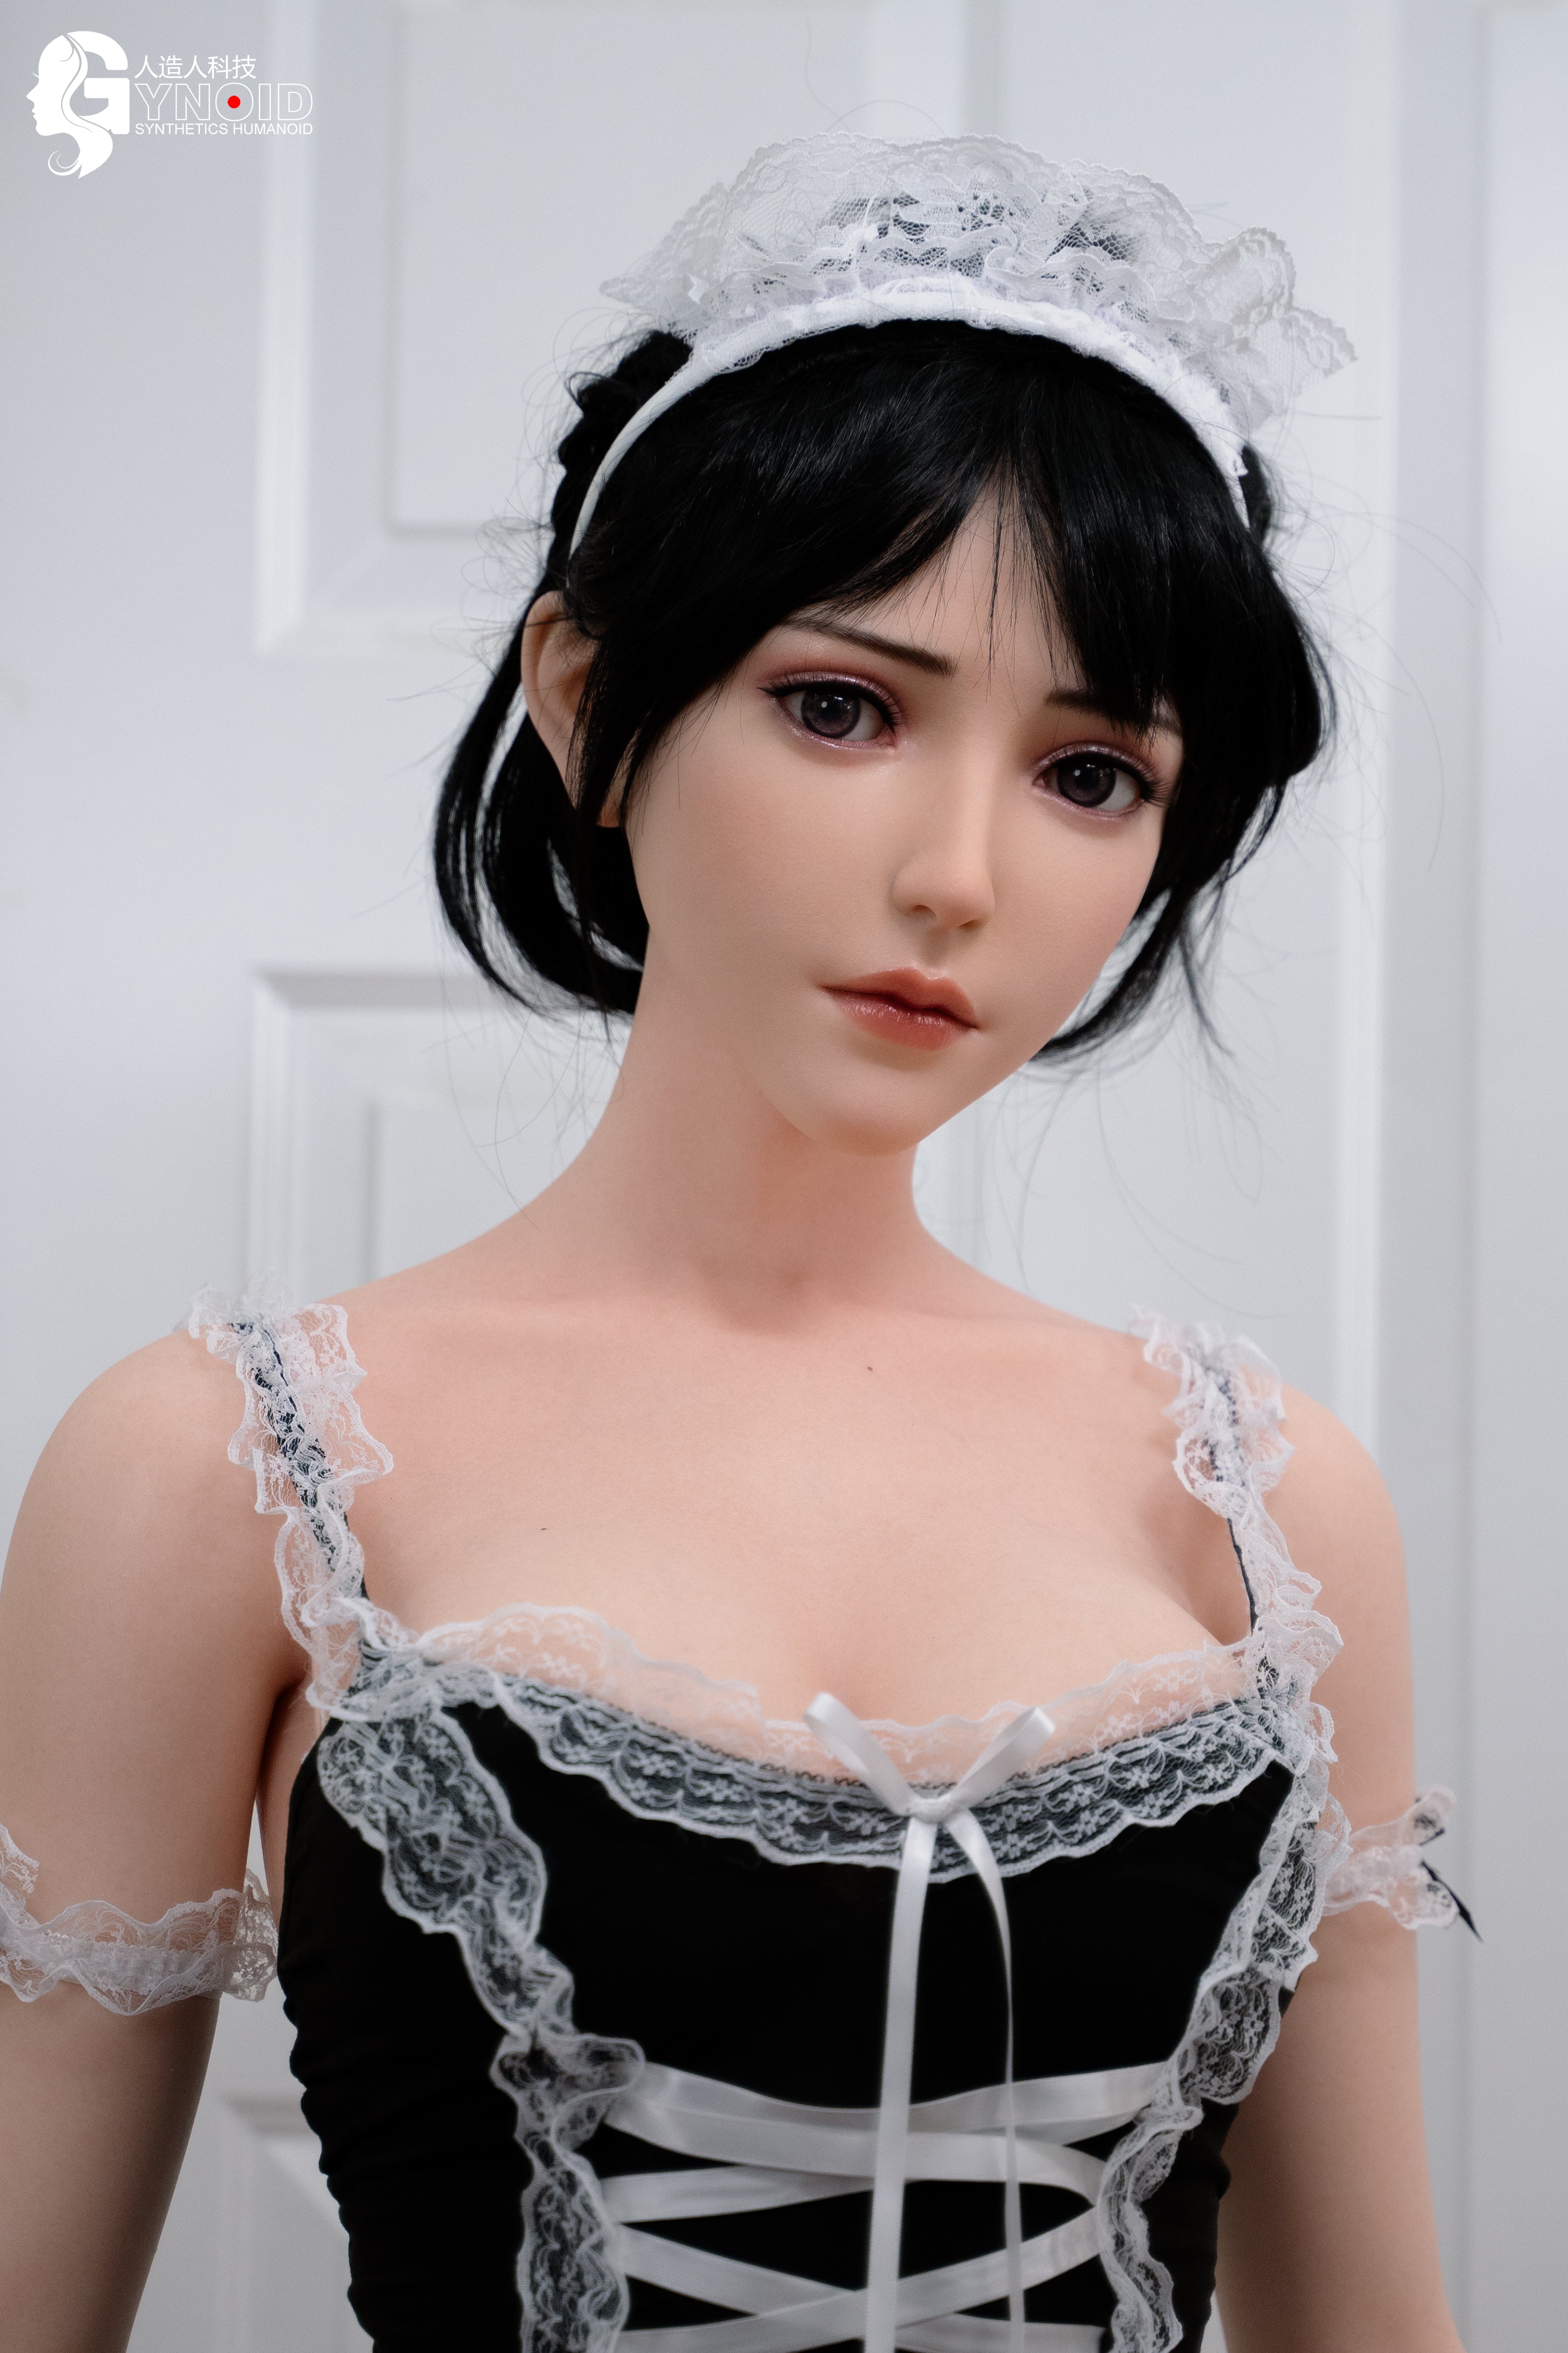 Gynoid Doll 168 cm Silicone - Arina | Buy Sex Dolls at DOLLS ACTUALLY